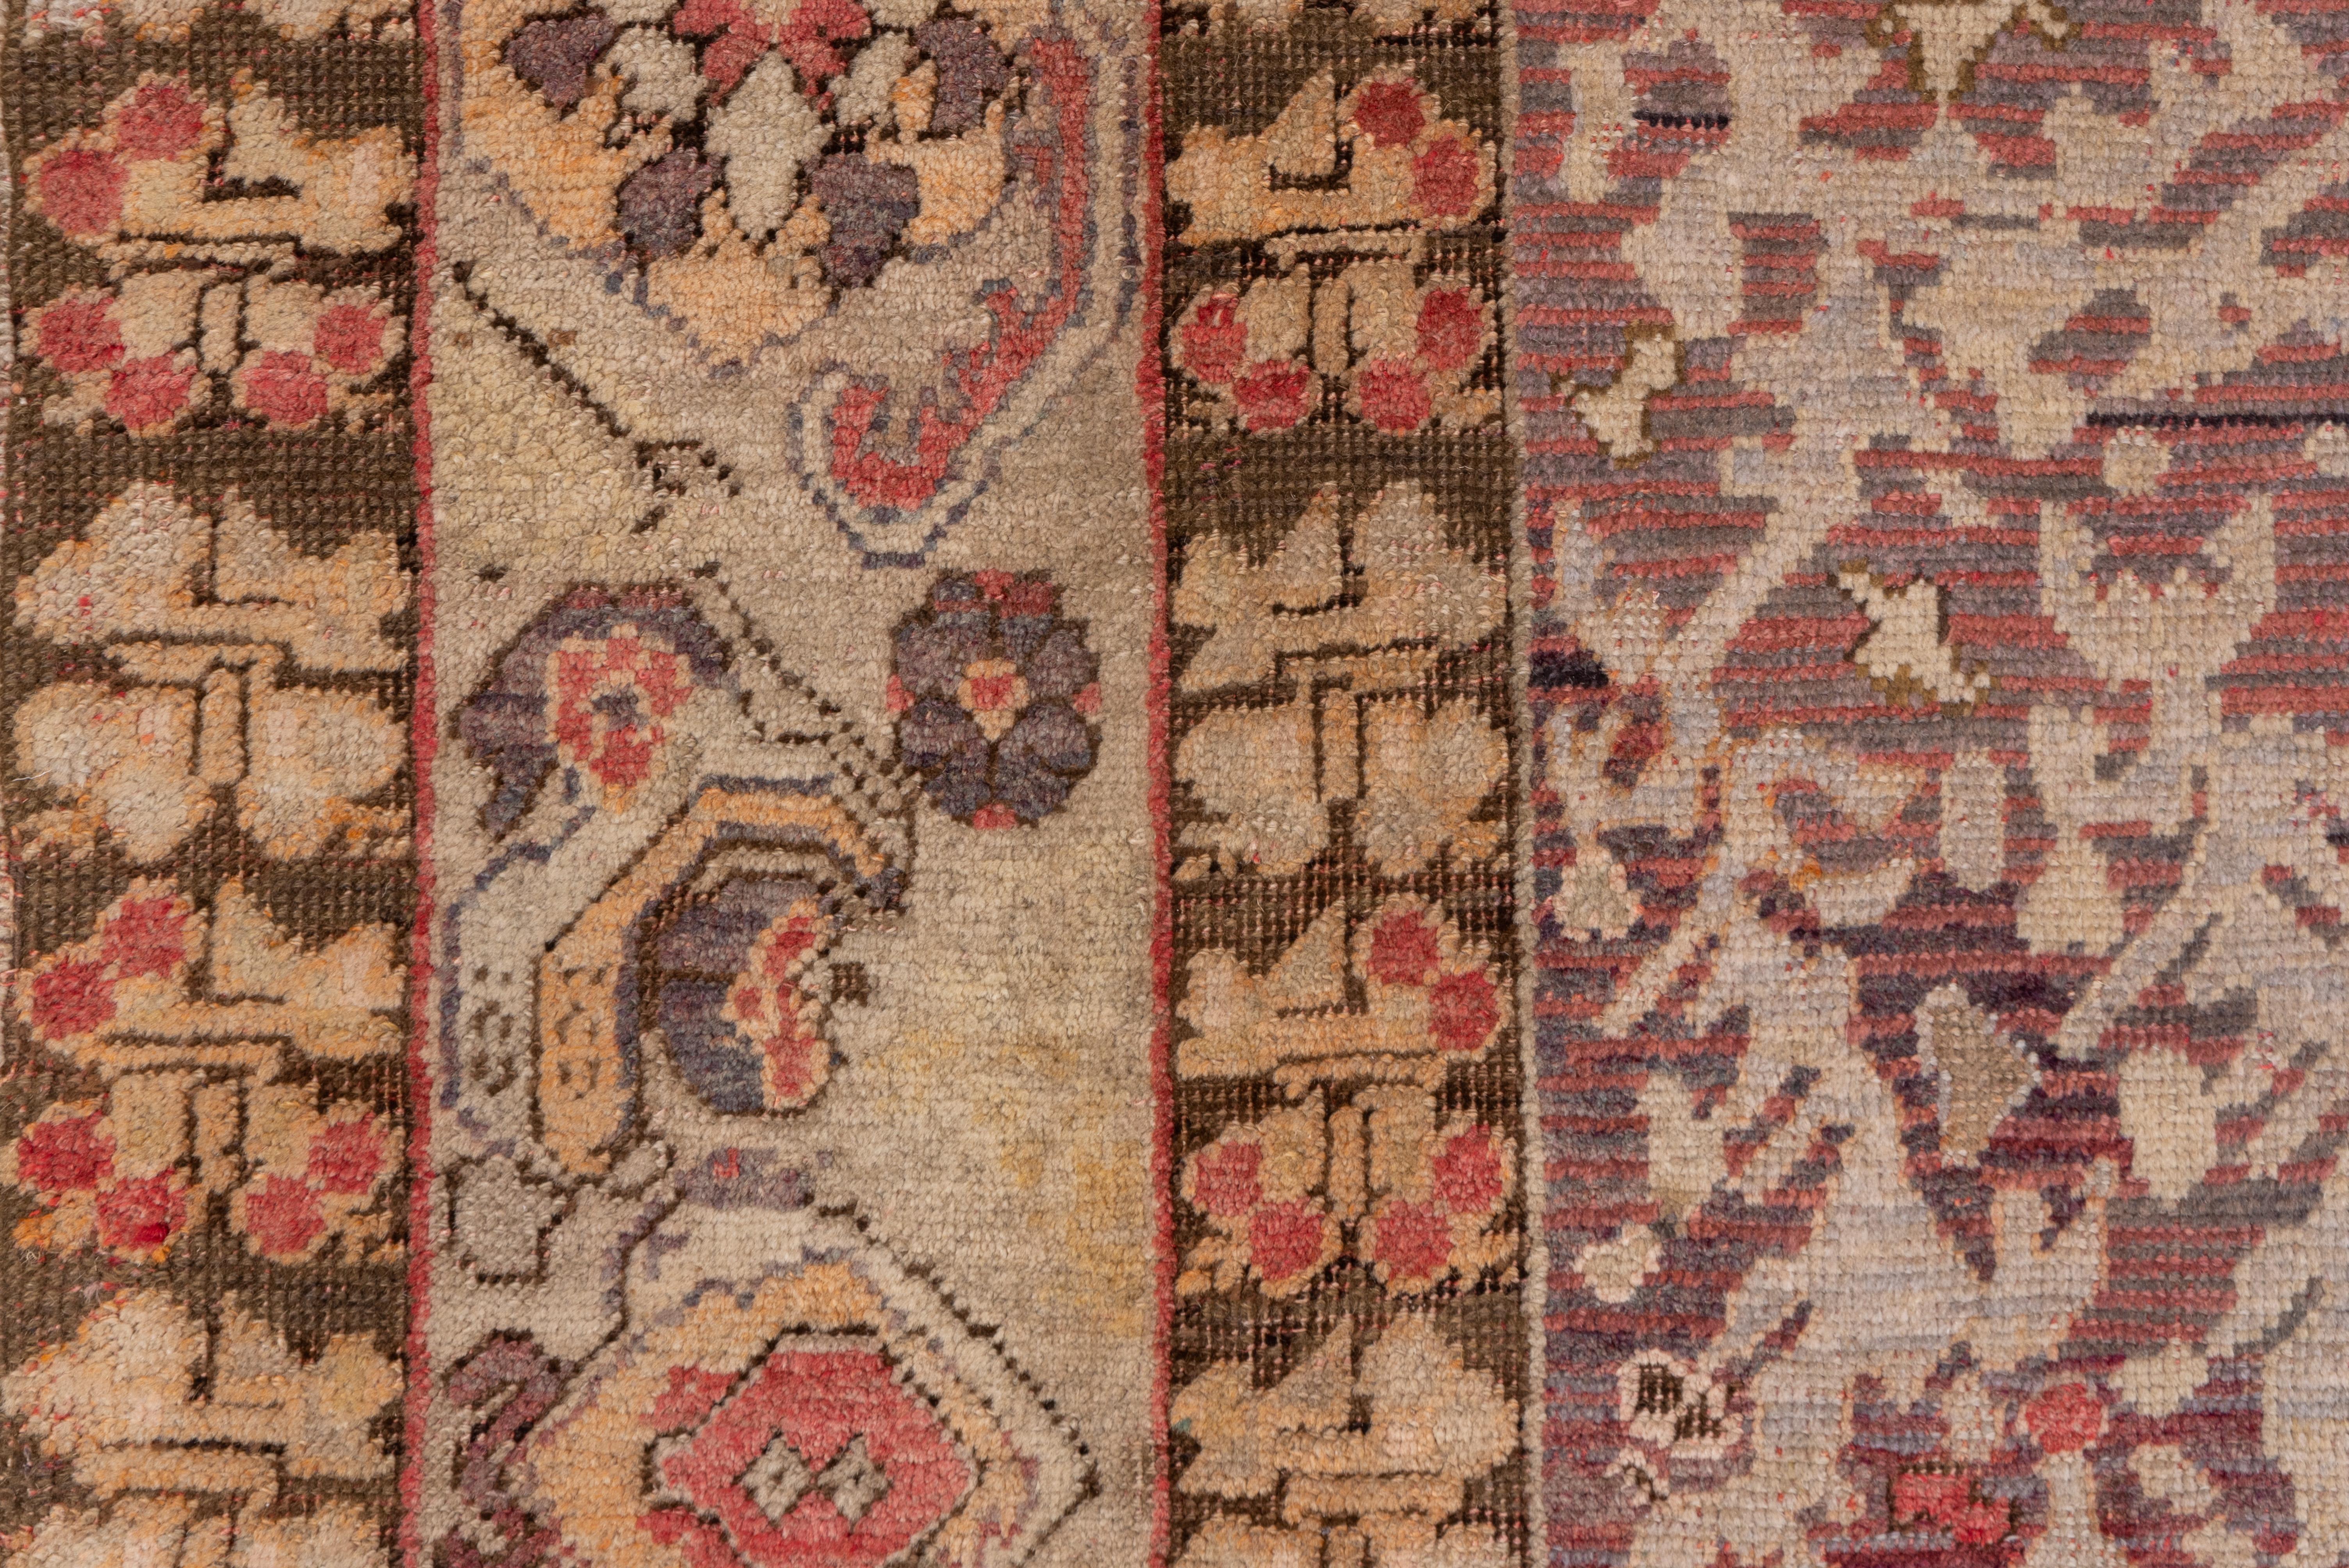 Mid-20th Century Unique Turkish Oushak Rug, Purple and Red Field, High Low Pile